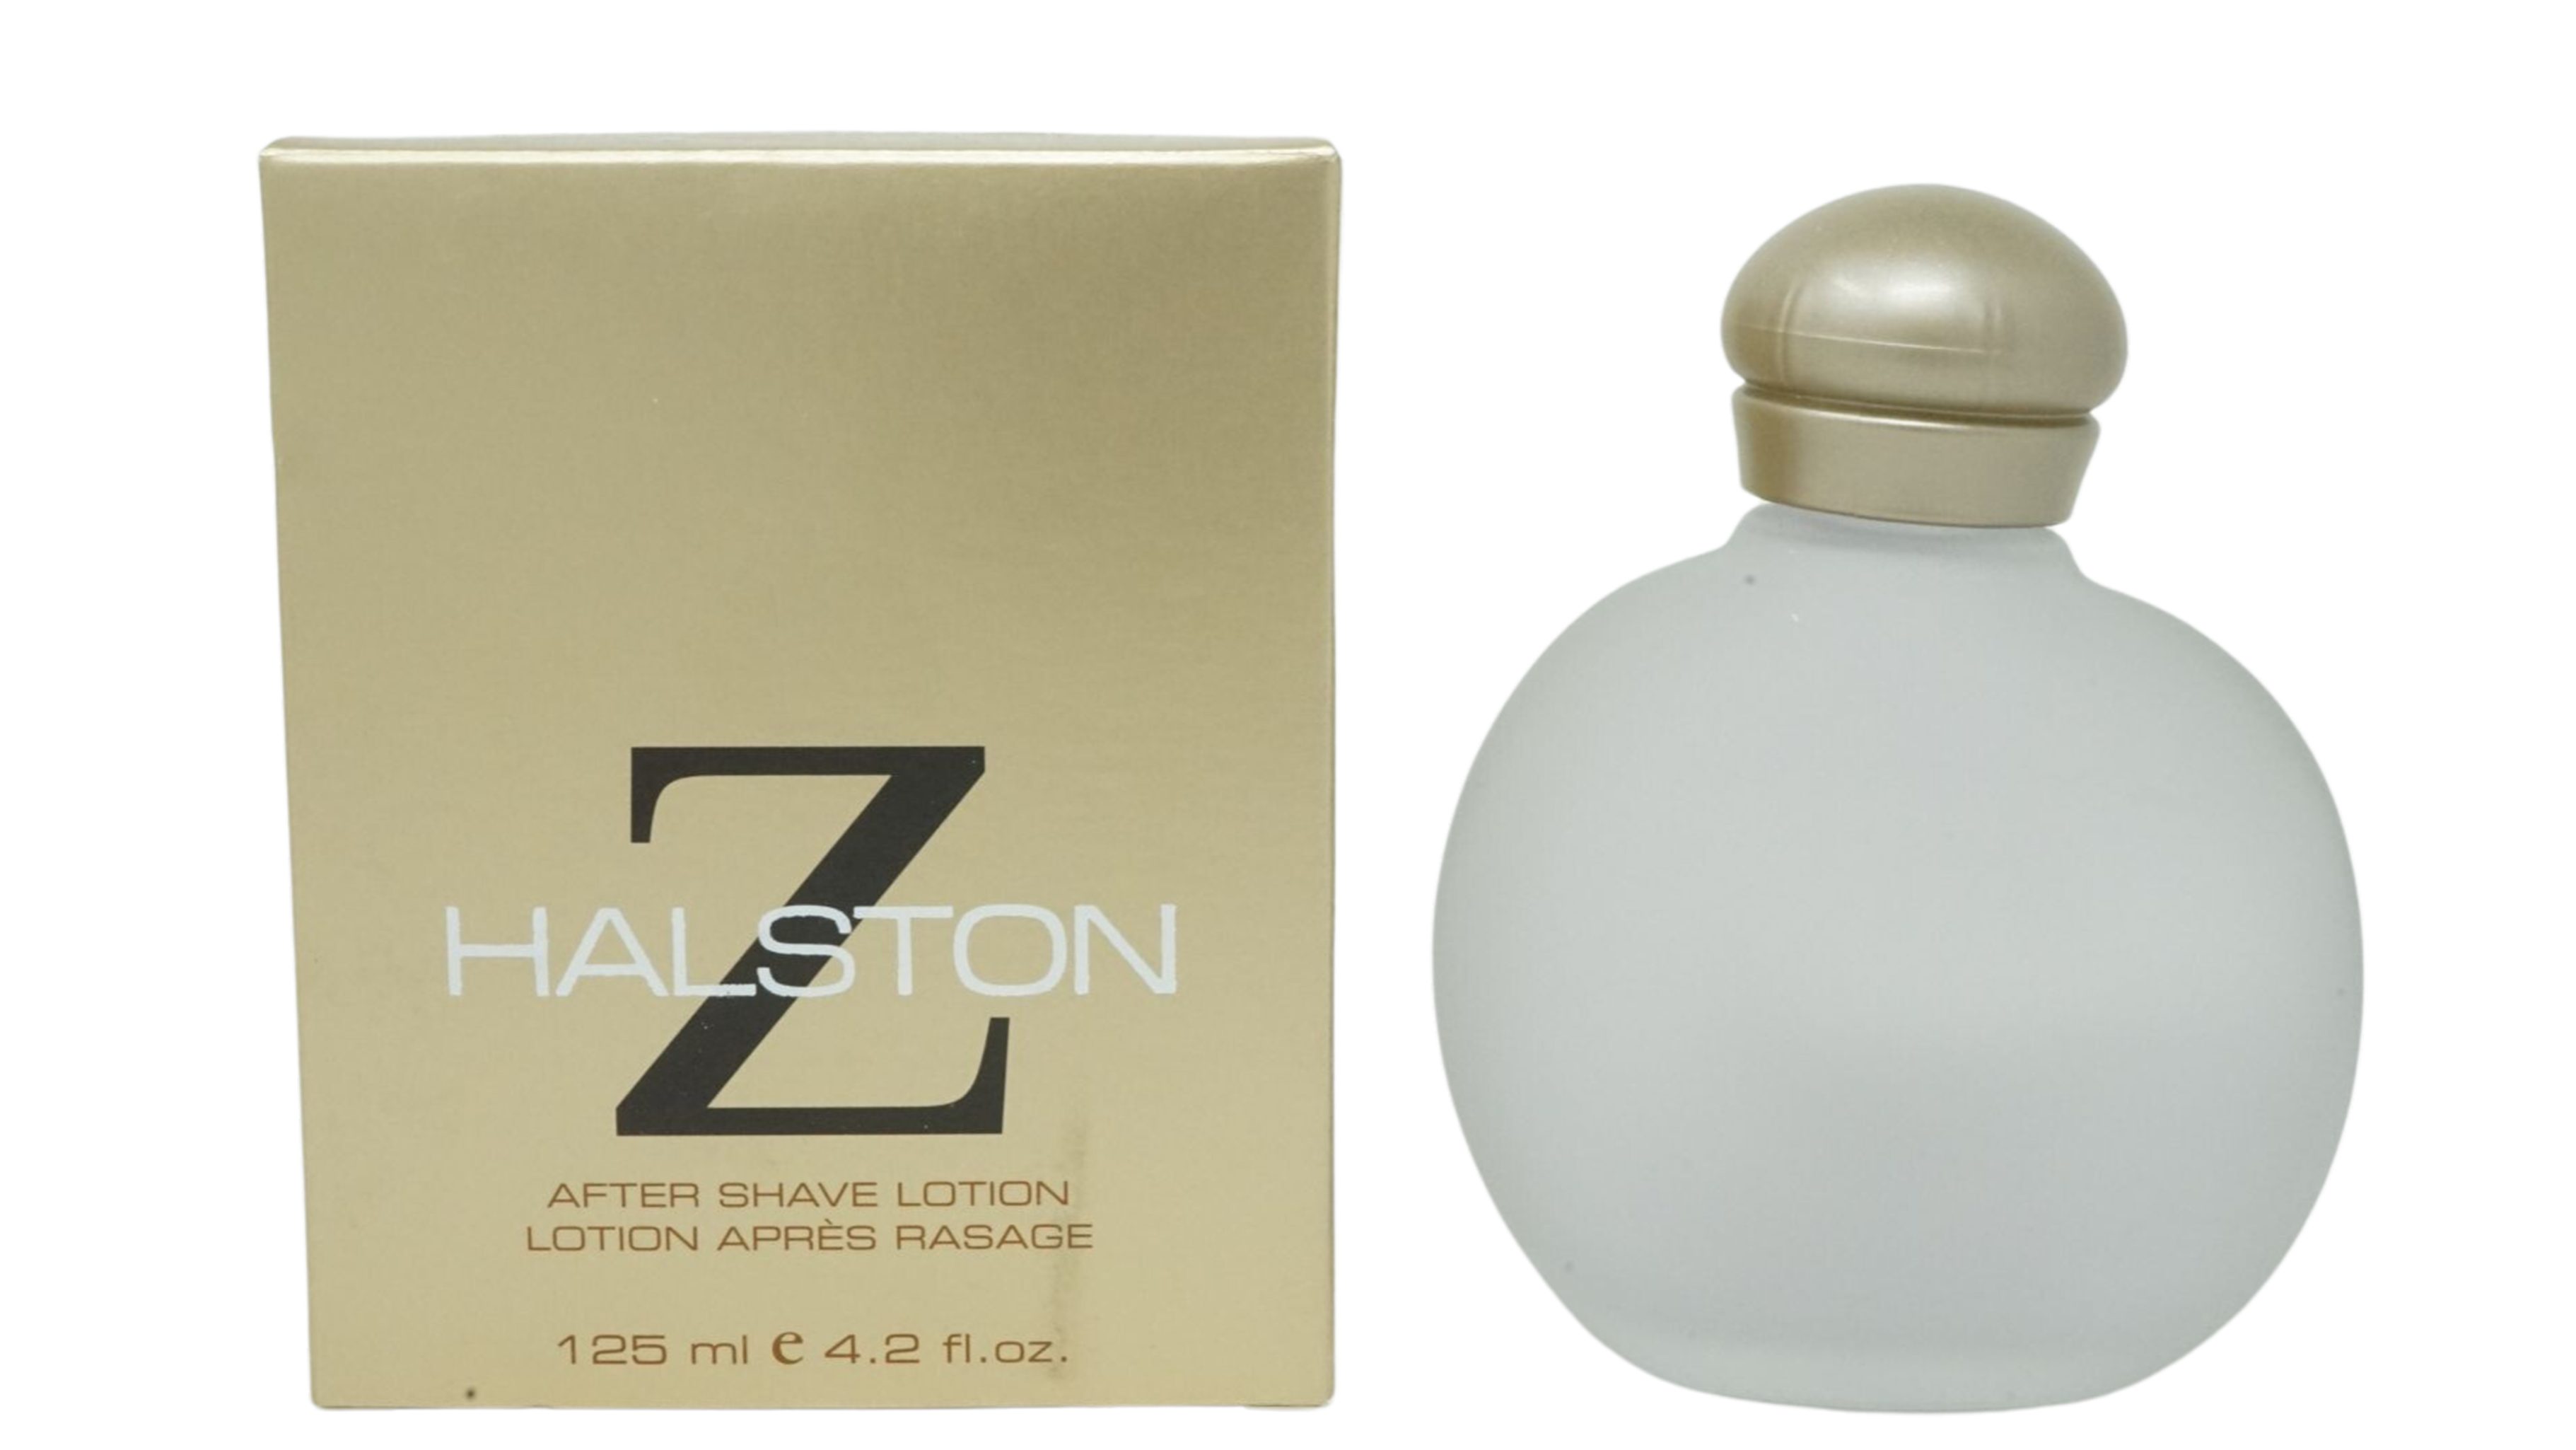 Halston After Shave Lotion Halston Z After Shave Lotion 125ml